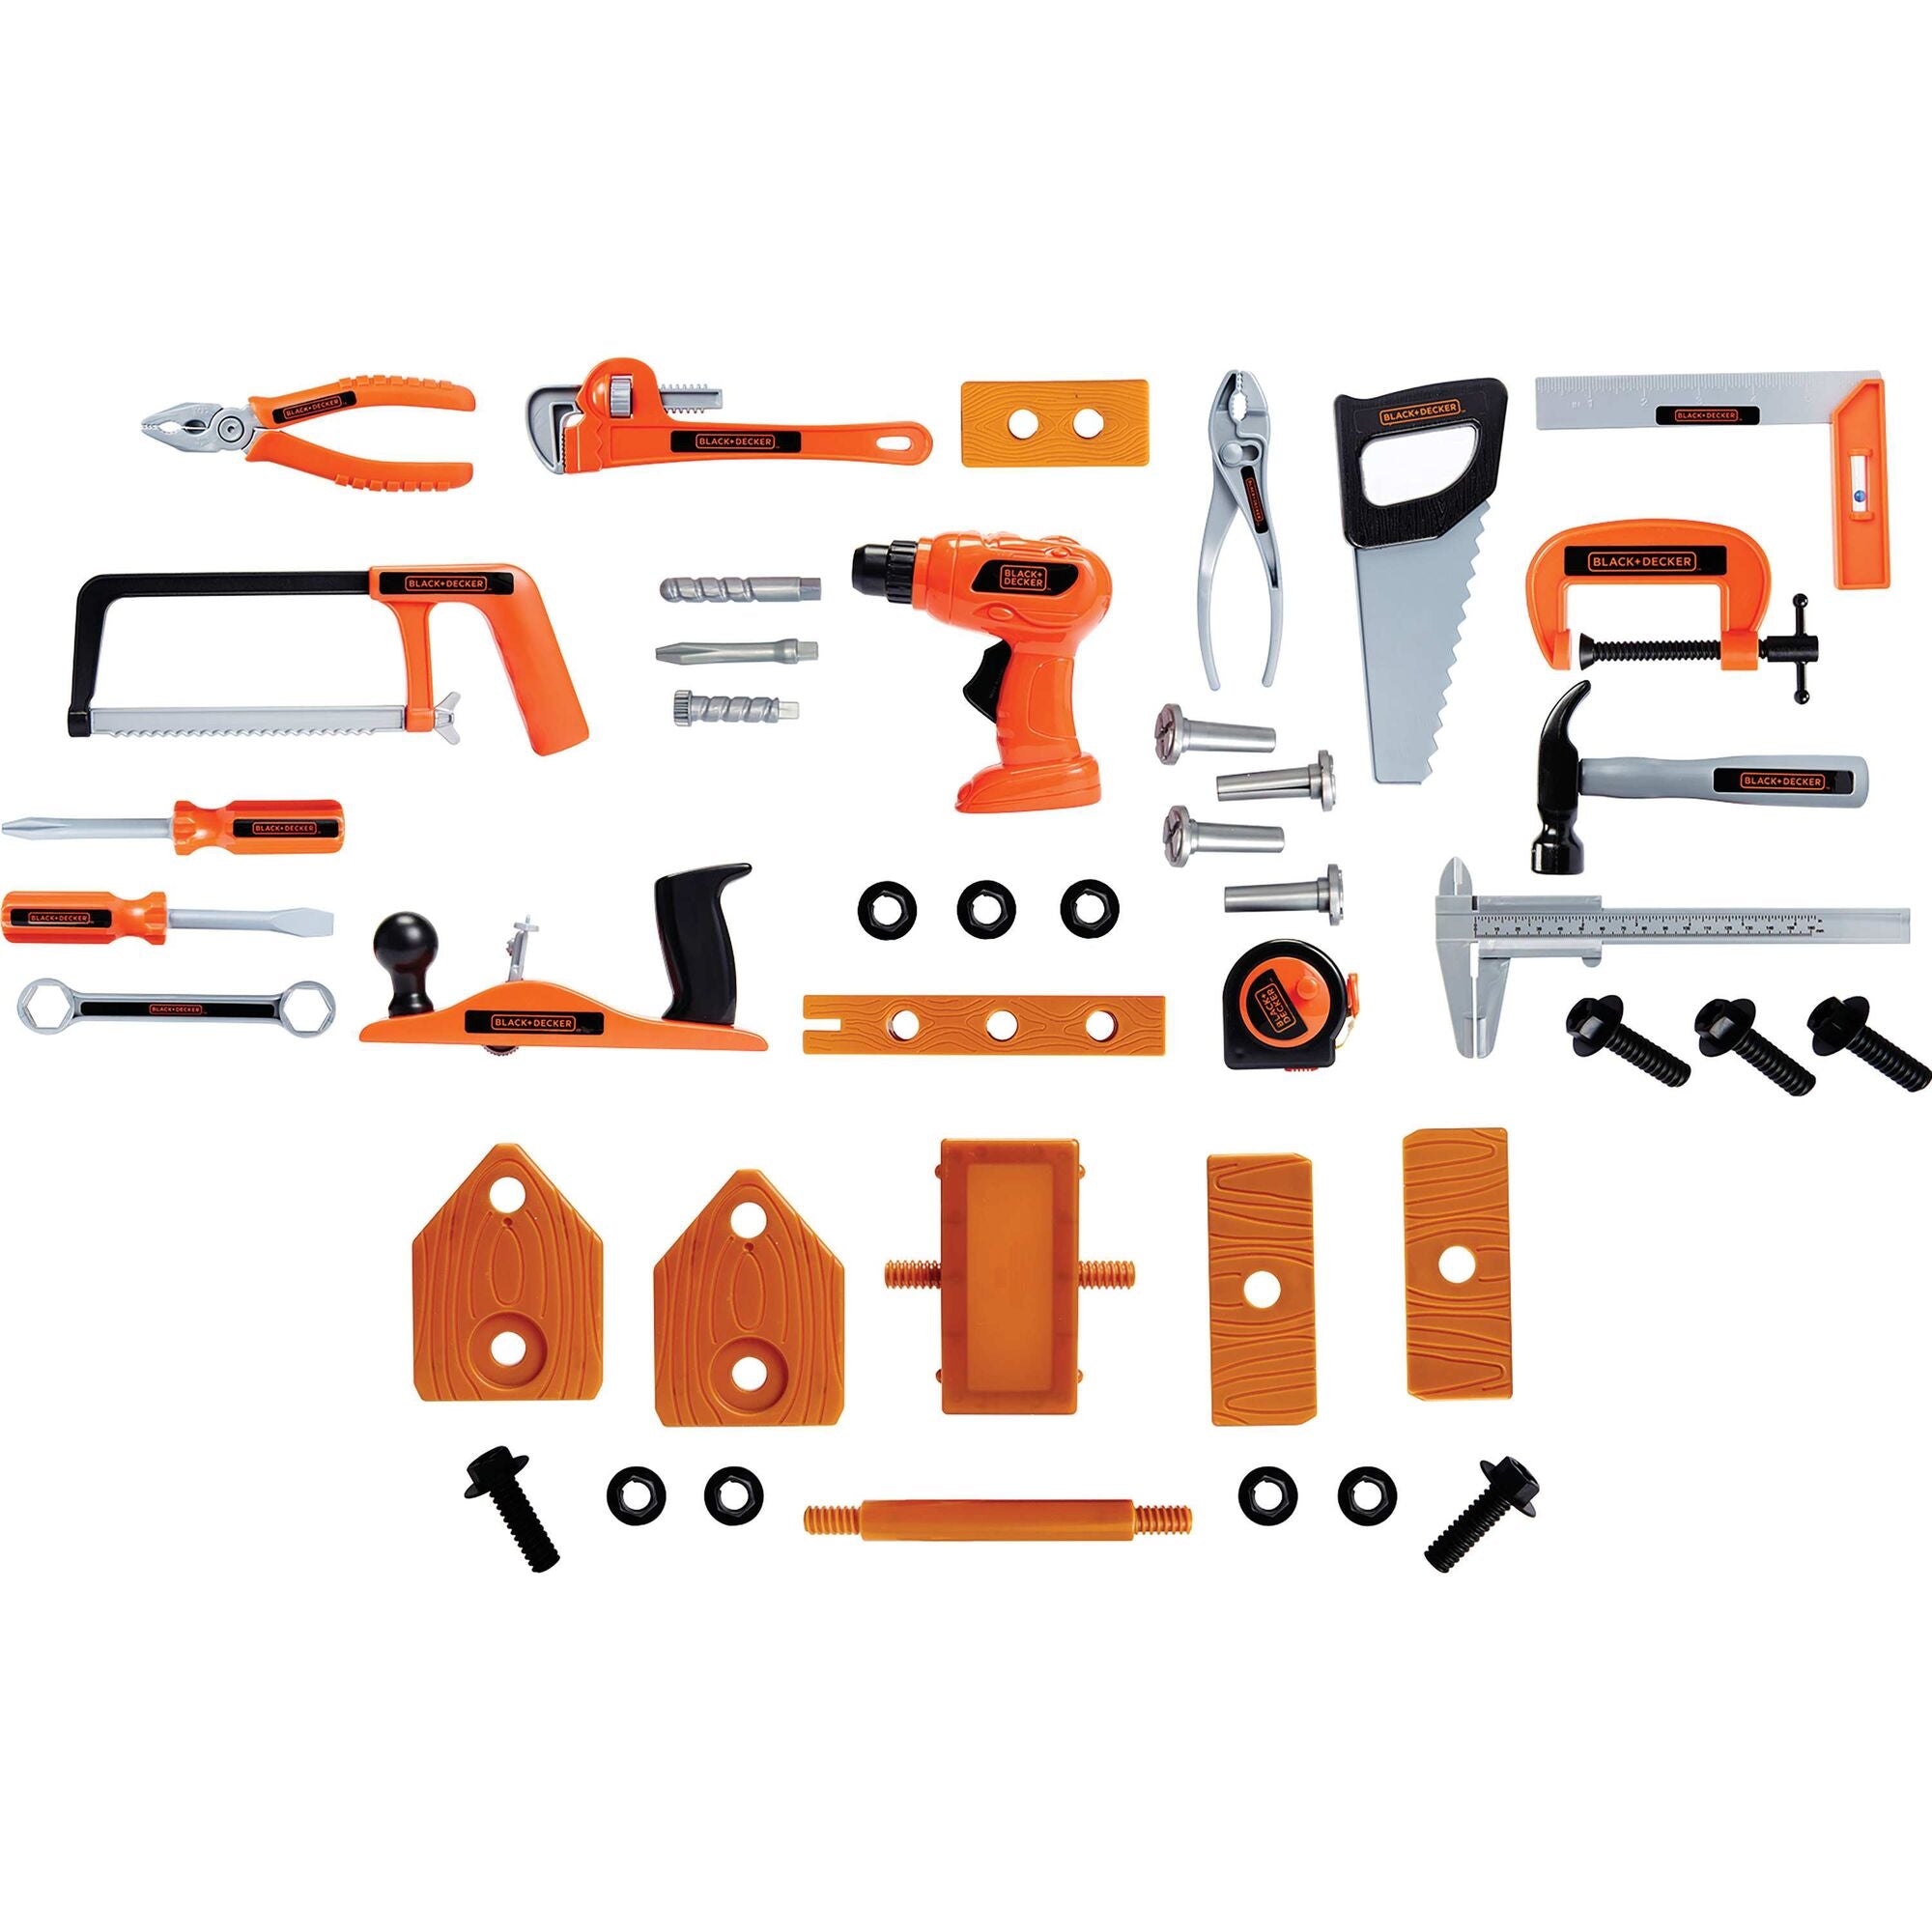 Black & Decker Toys - 21 Parts - Toolbox » Quick Shipping